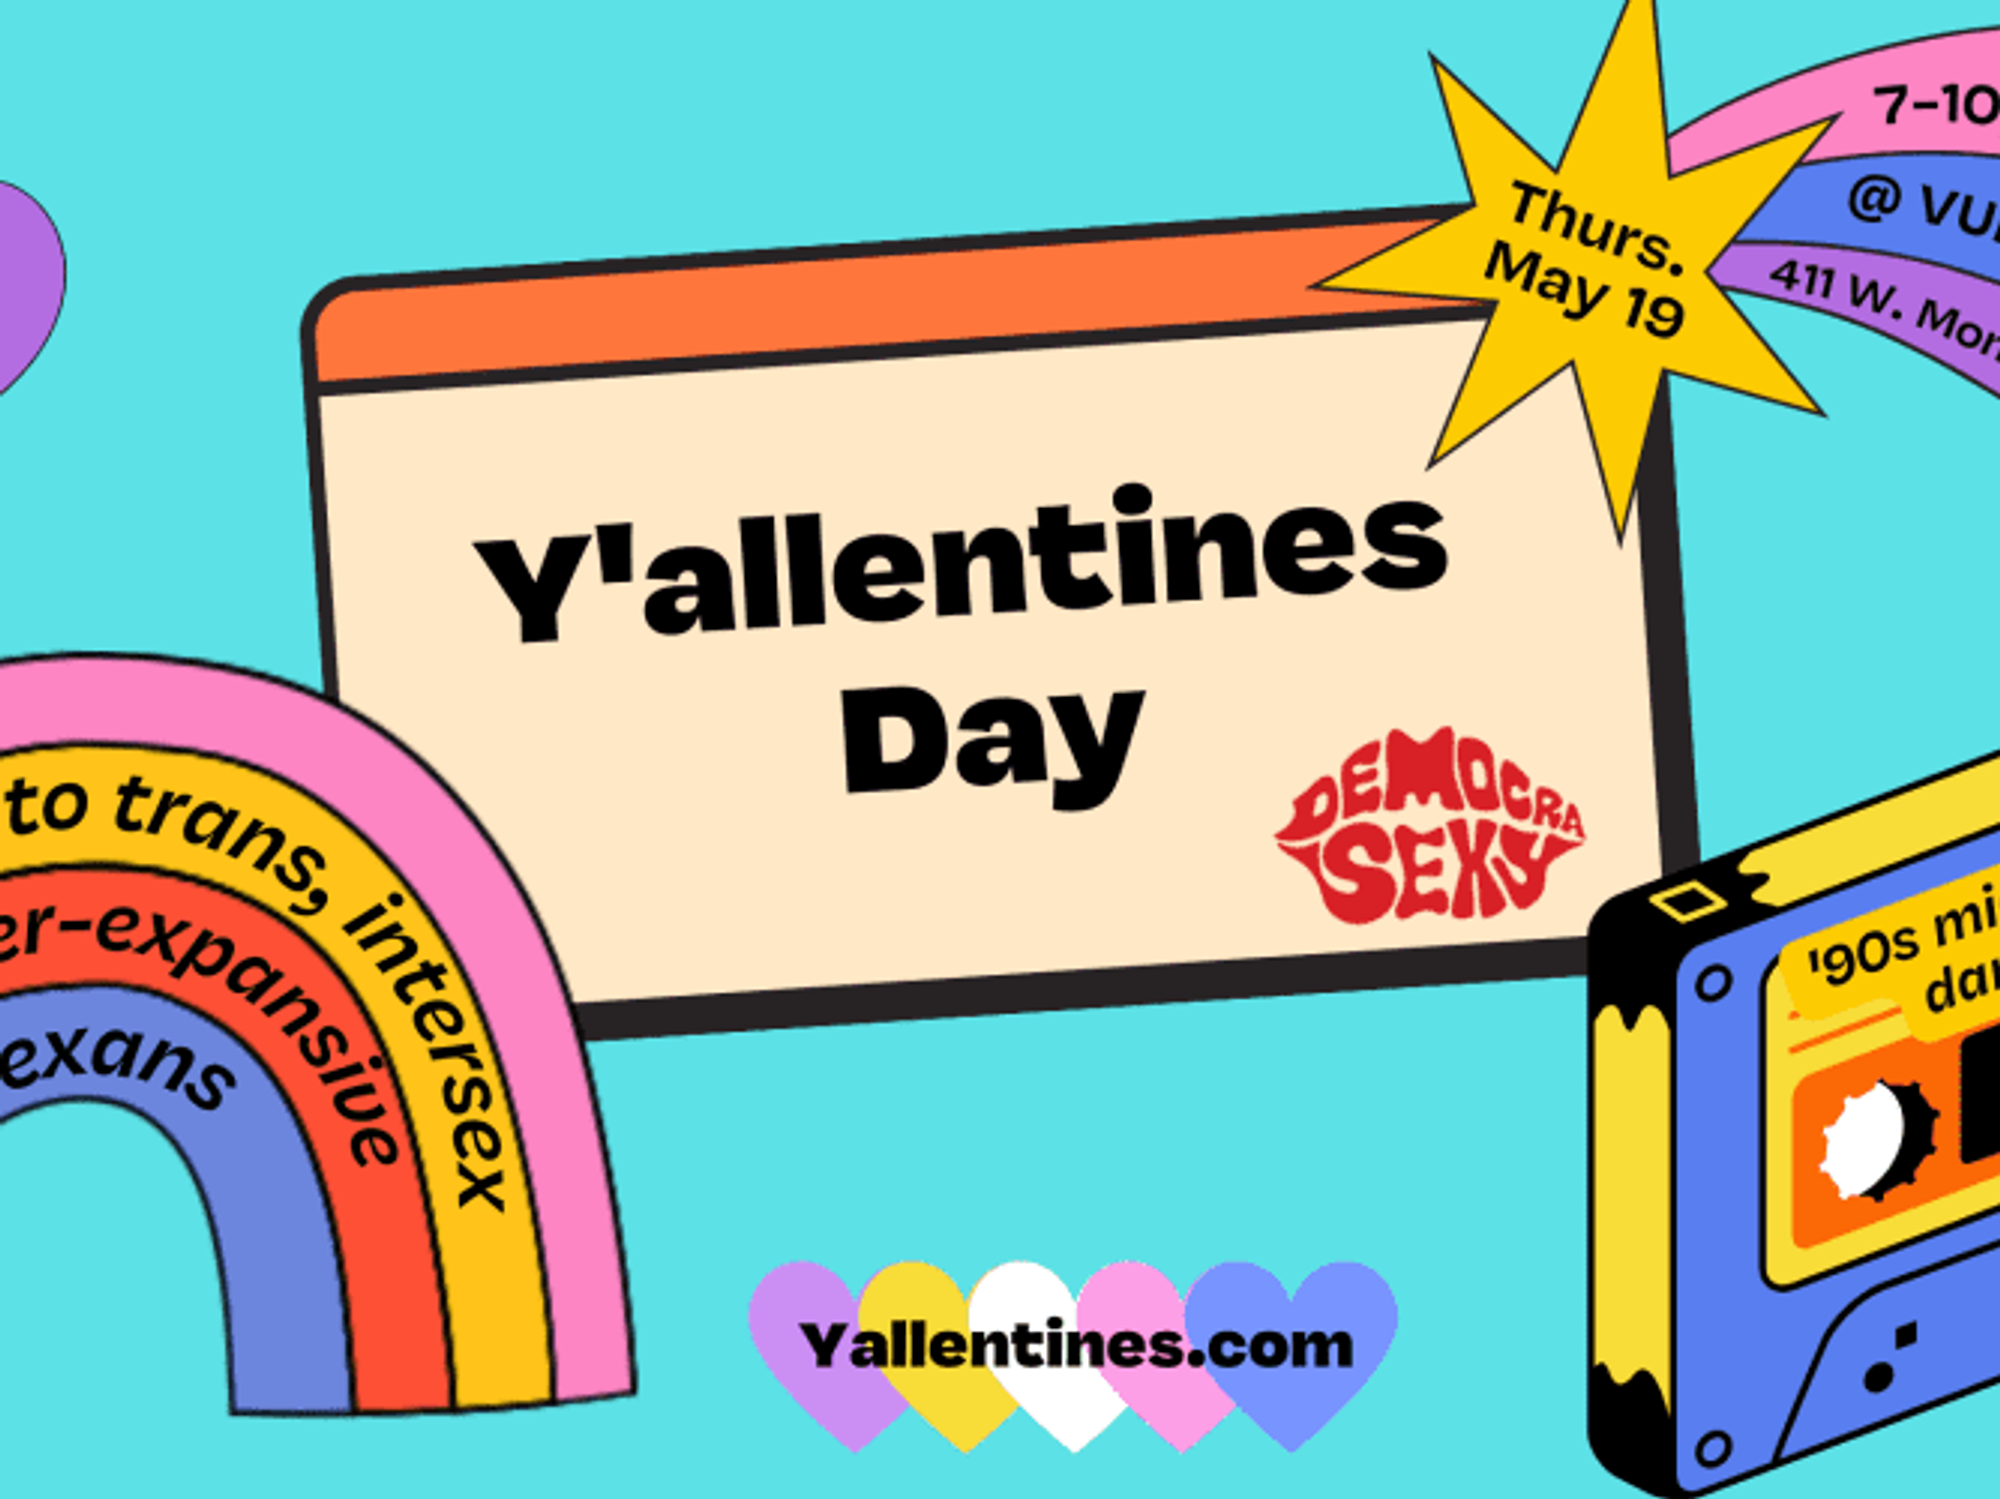 The poster for Y'allentines Day by Democrasexy